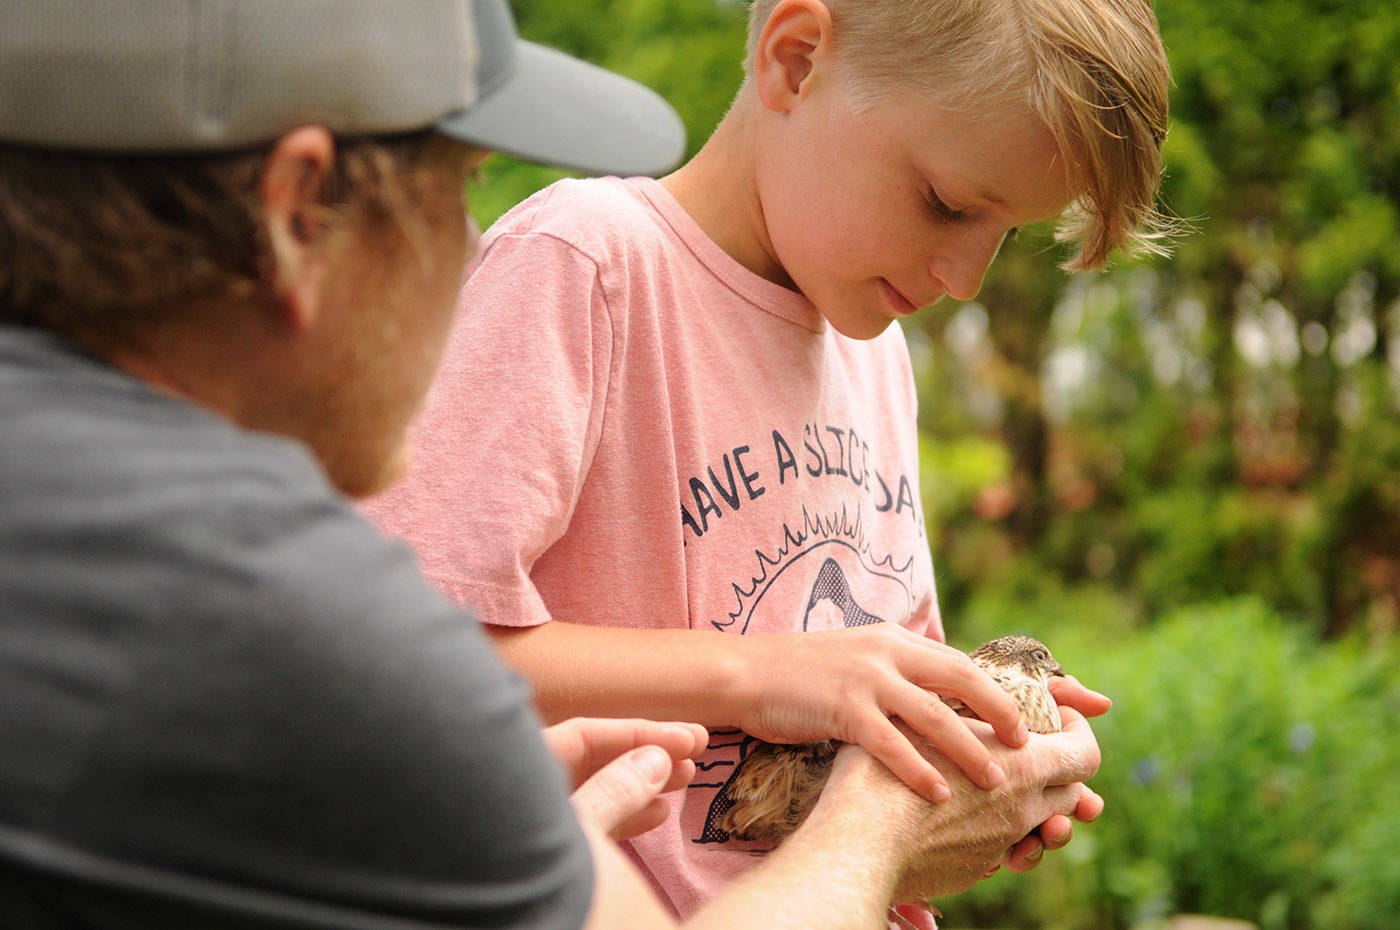 Nick Meredith hands a quail to his 10-year-old son Lukas in their backyard in Chilliwack on Friday, May 28, 2021. The family was ordered to move their backyard quail or face a fine. (Jenna Hauck/ Chilliwack Progress)